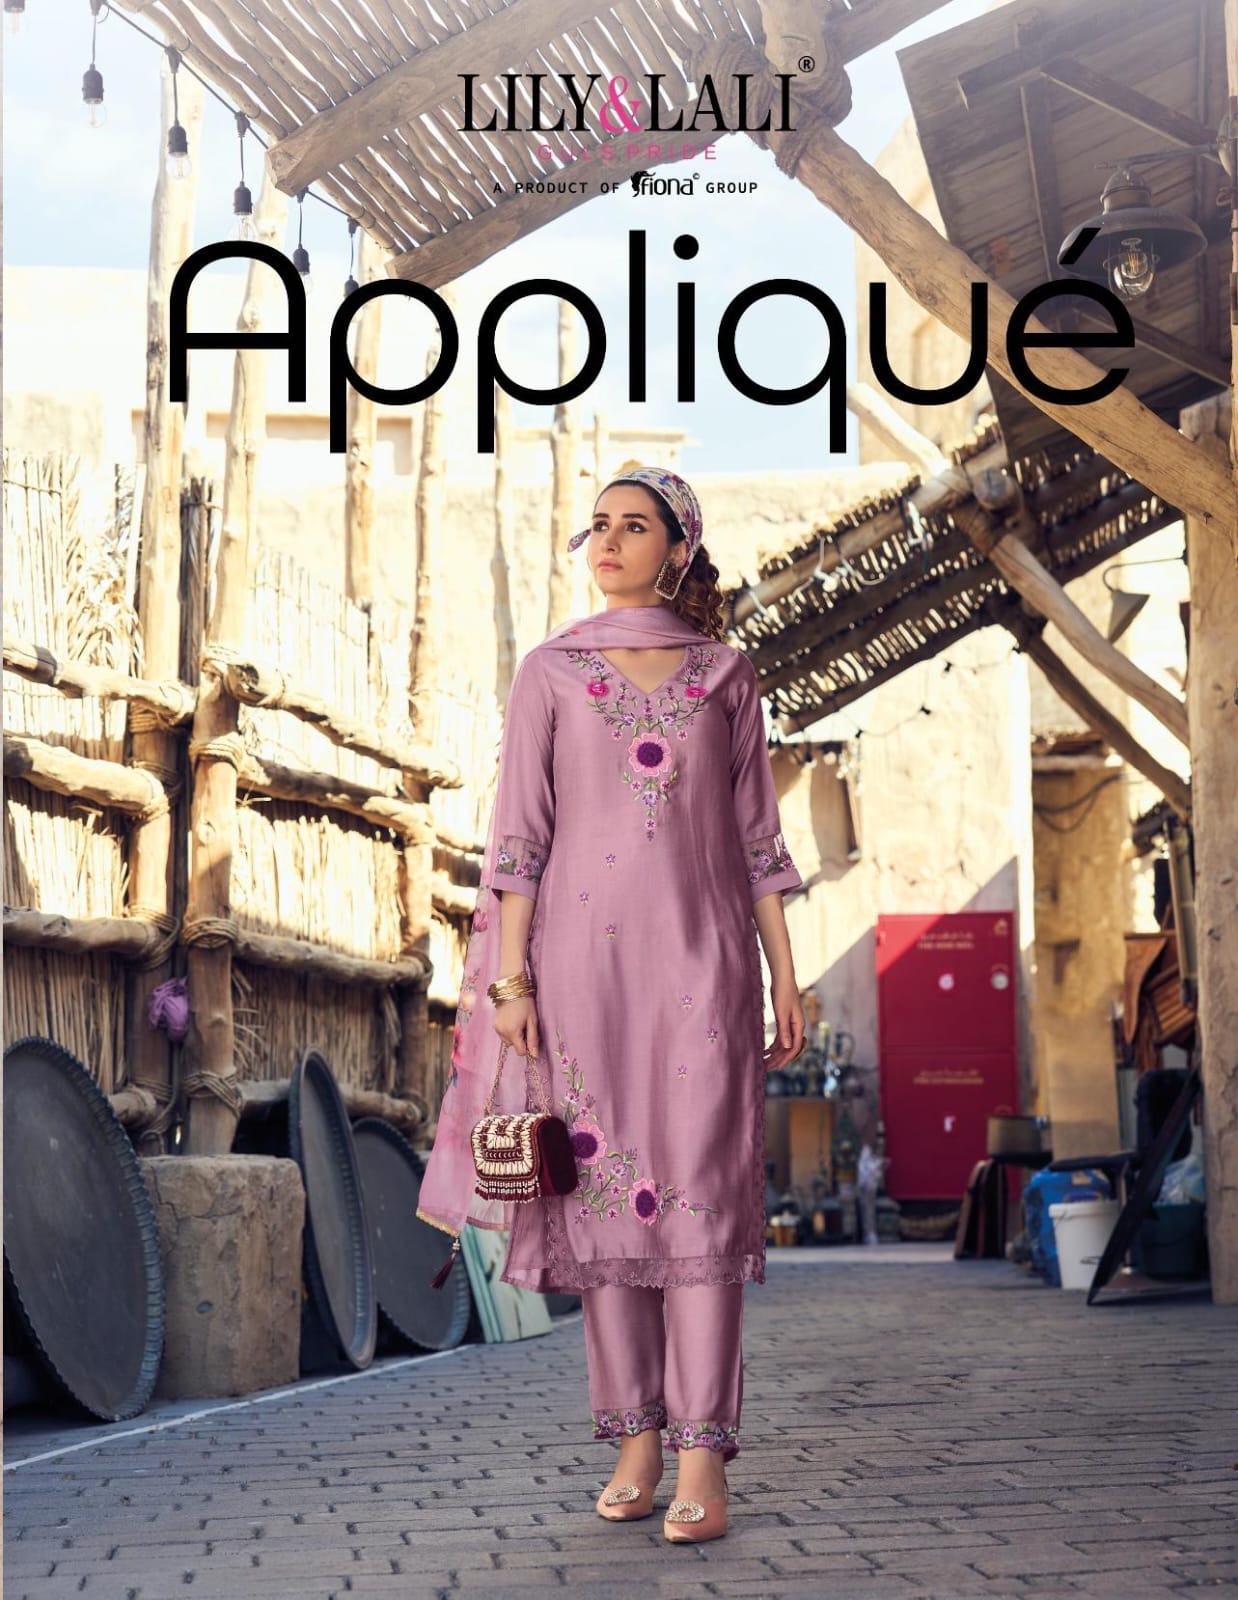 Applique Lily Lali Milan Silk Readymade Pant Style Suits